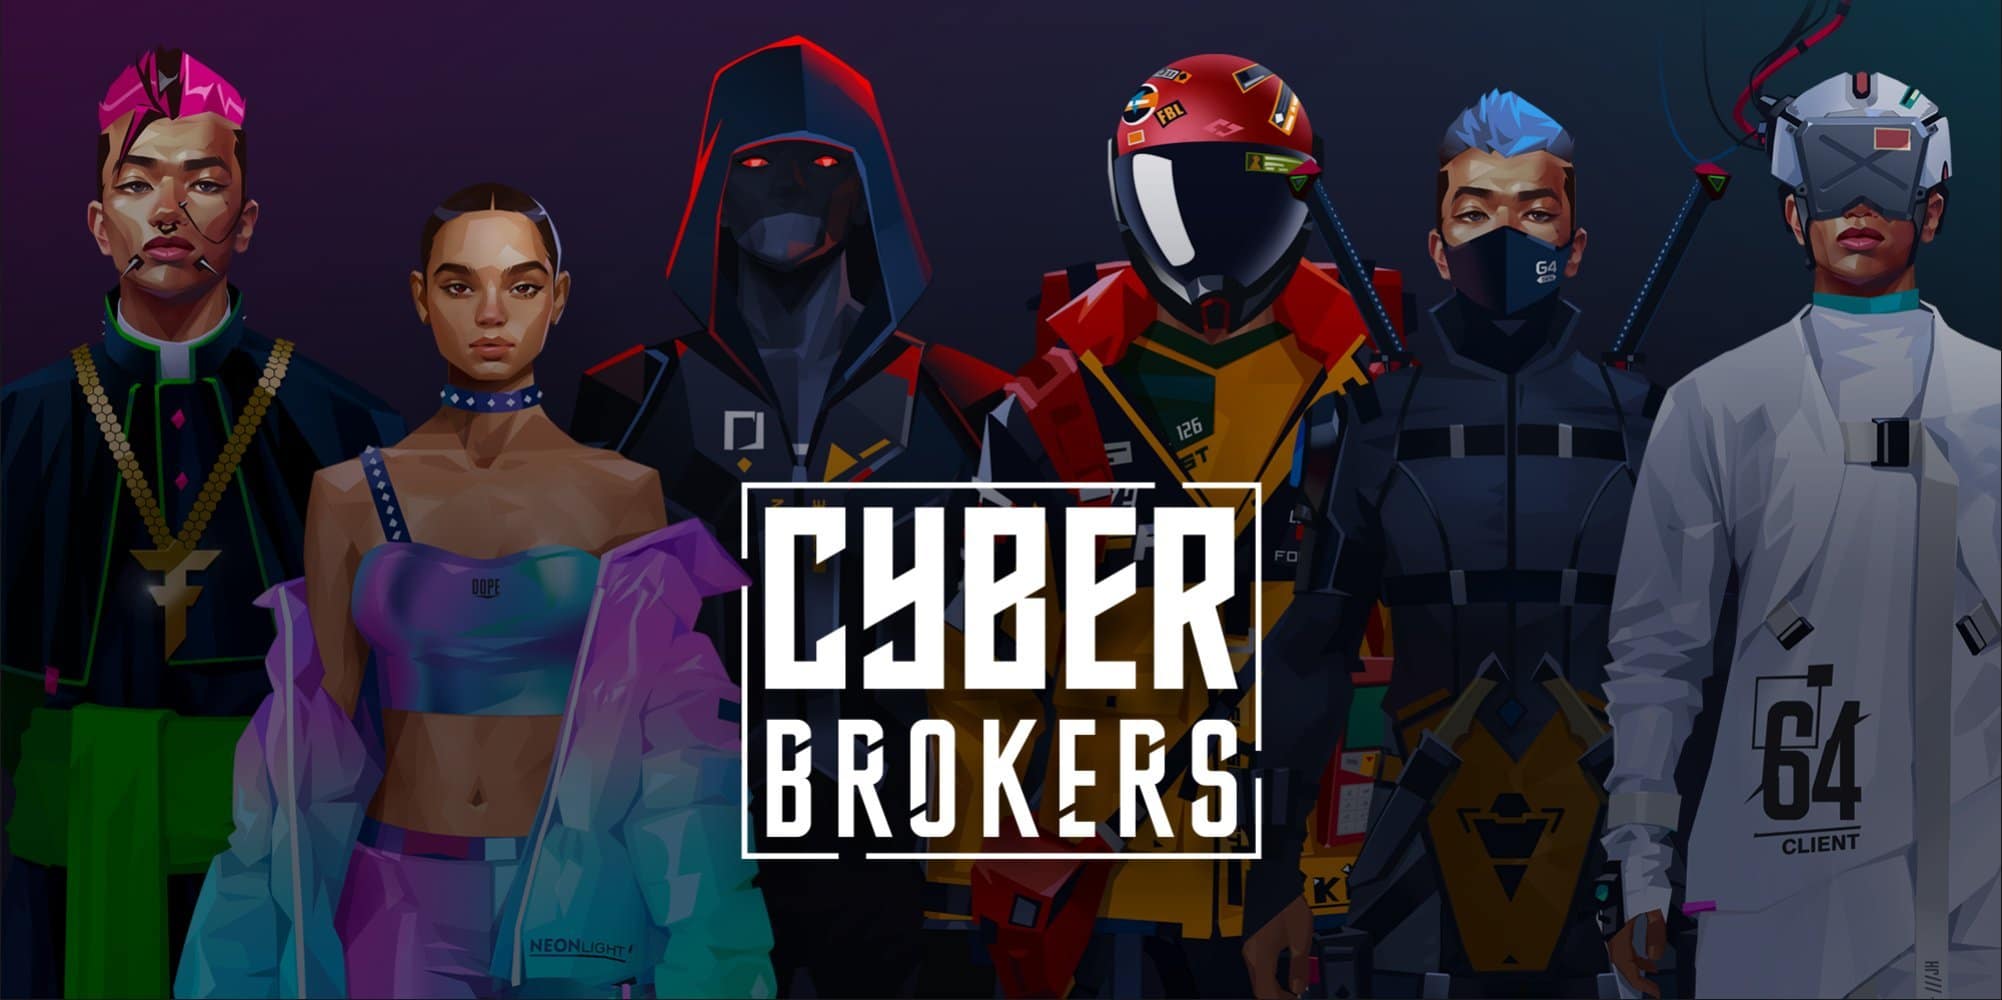 CyberBrokers NFT poster